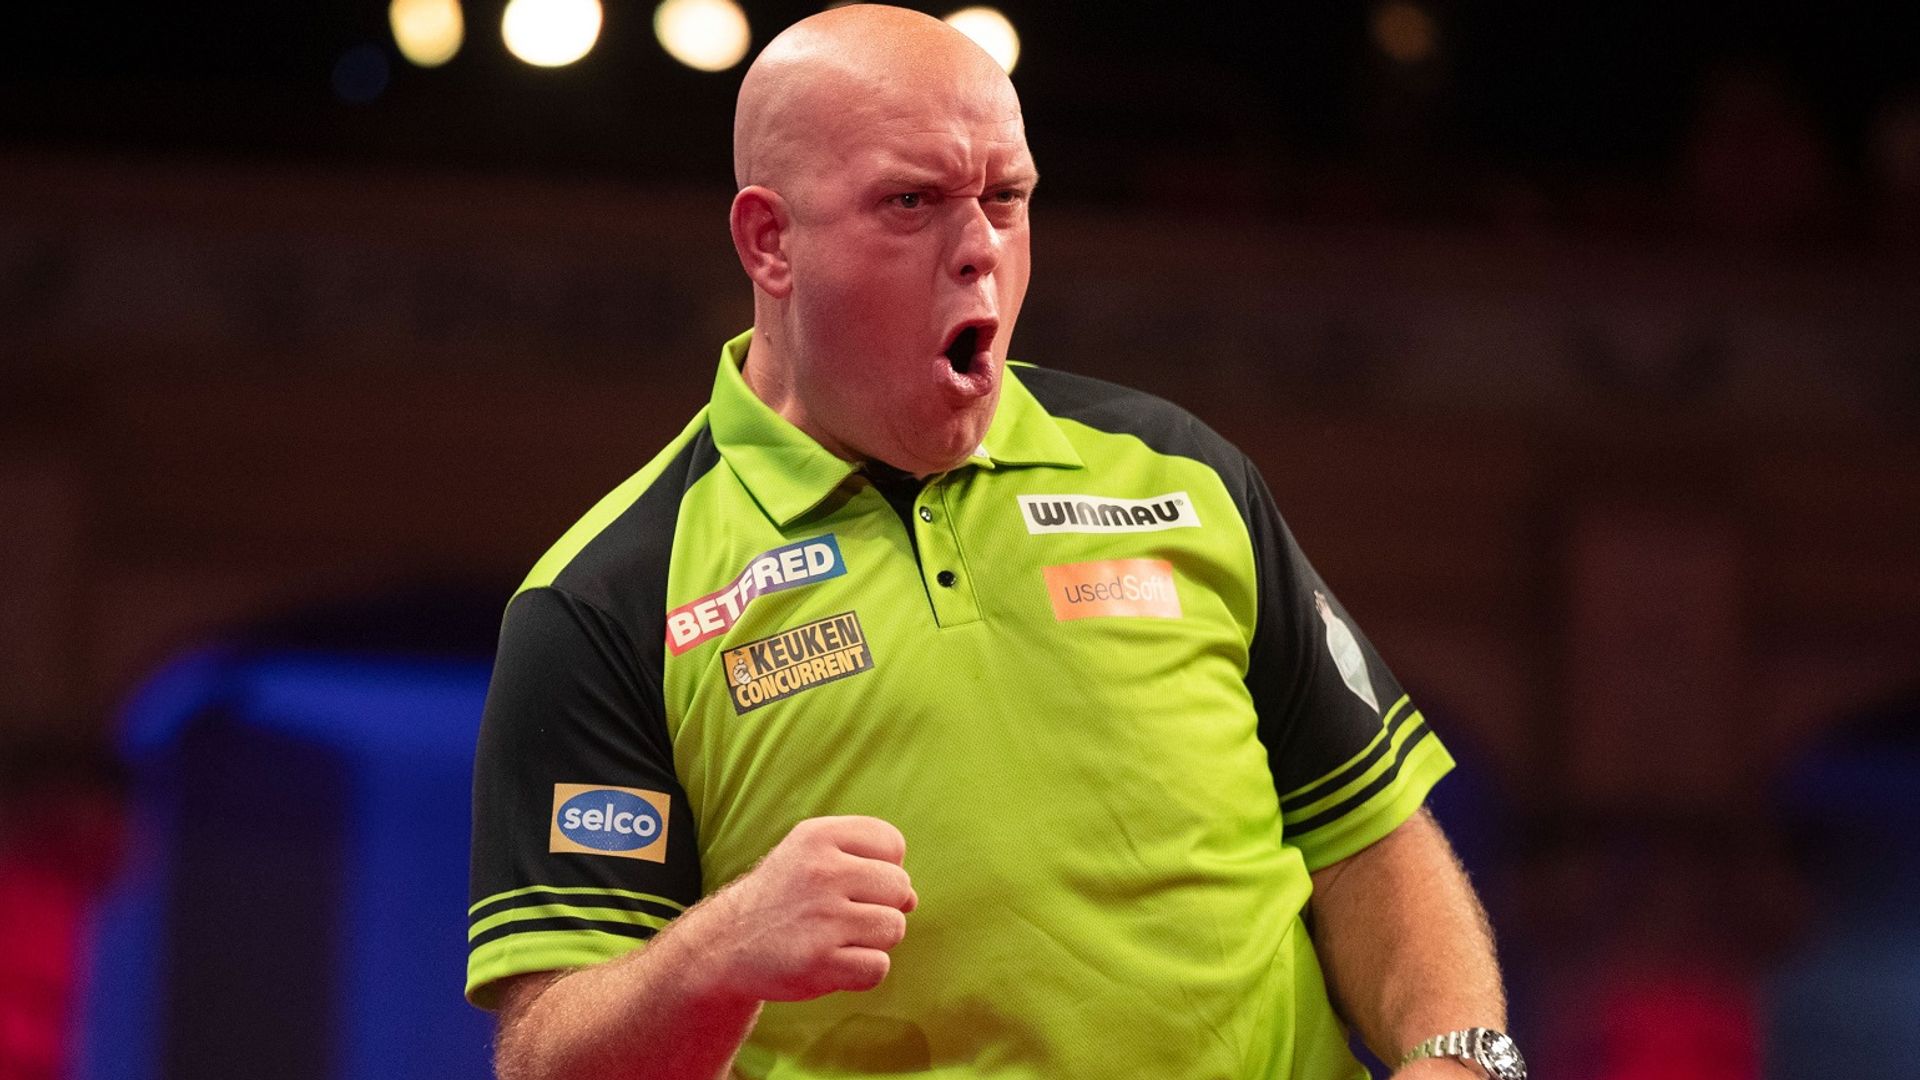 World Grand Prix Darts Recap I MVG eases past Anderson while Wright & Clayton win